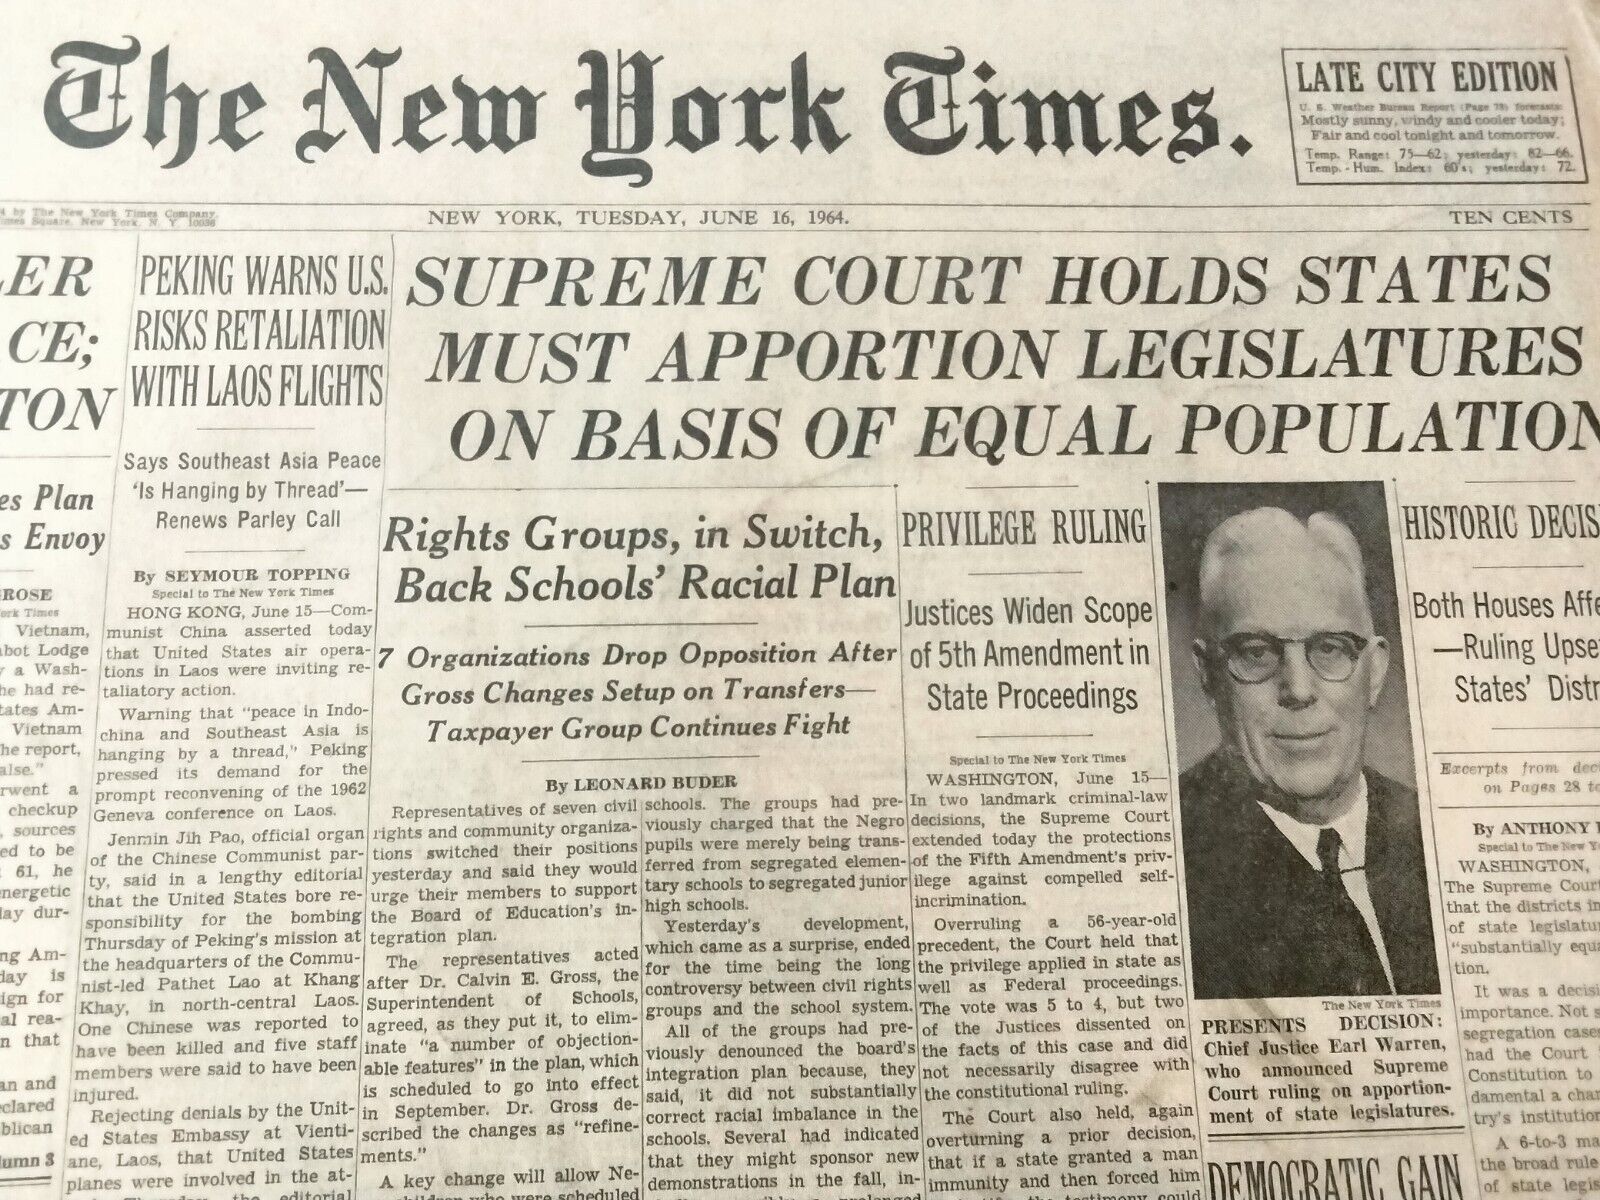 Newspapers- SUPREME COURT RULES EQUAL POPULATION FOR STATES, MARTIN LUTHER KING 